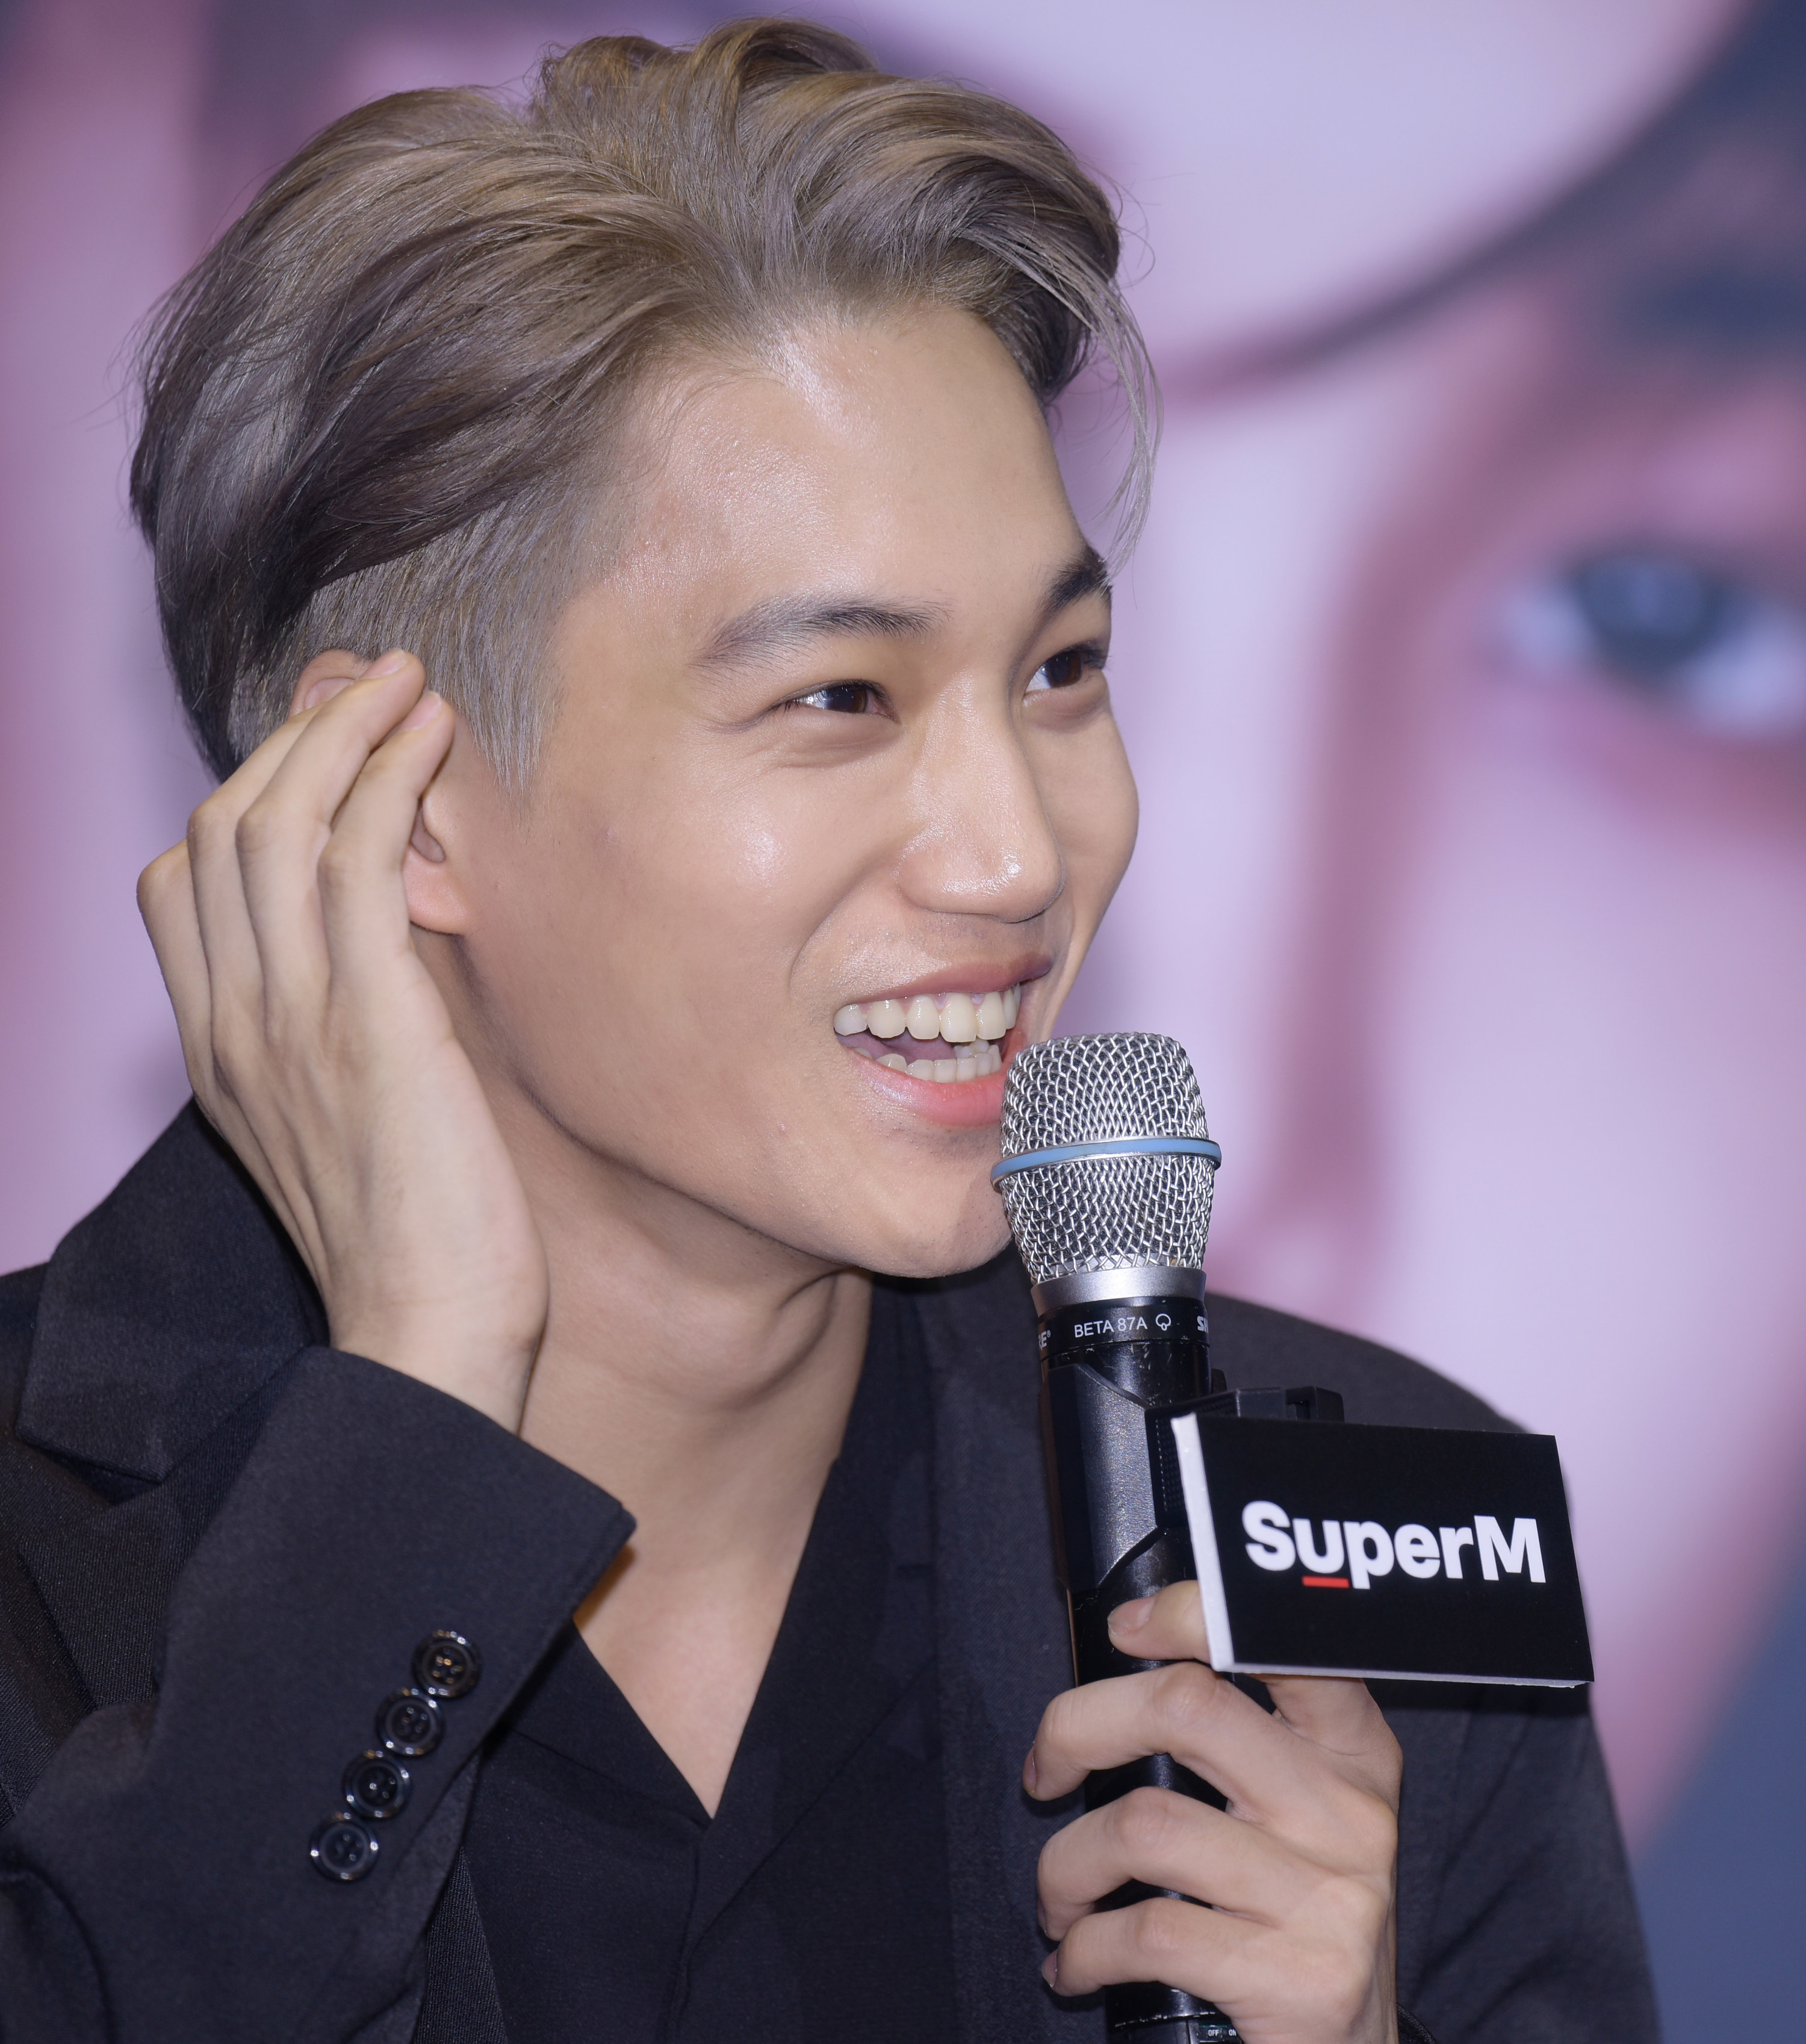 Kai speaking at an event